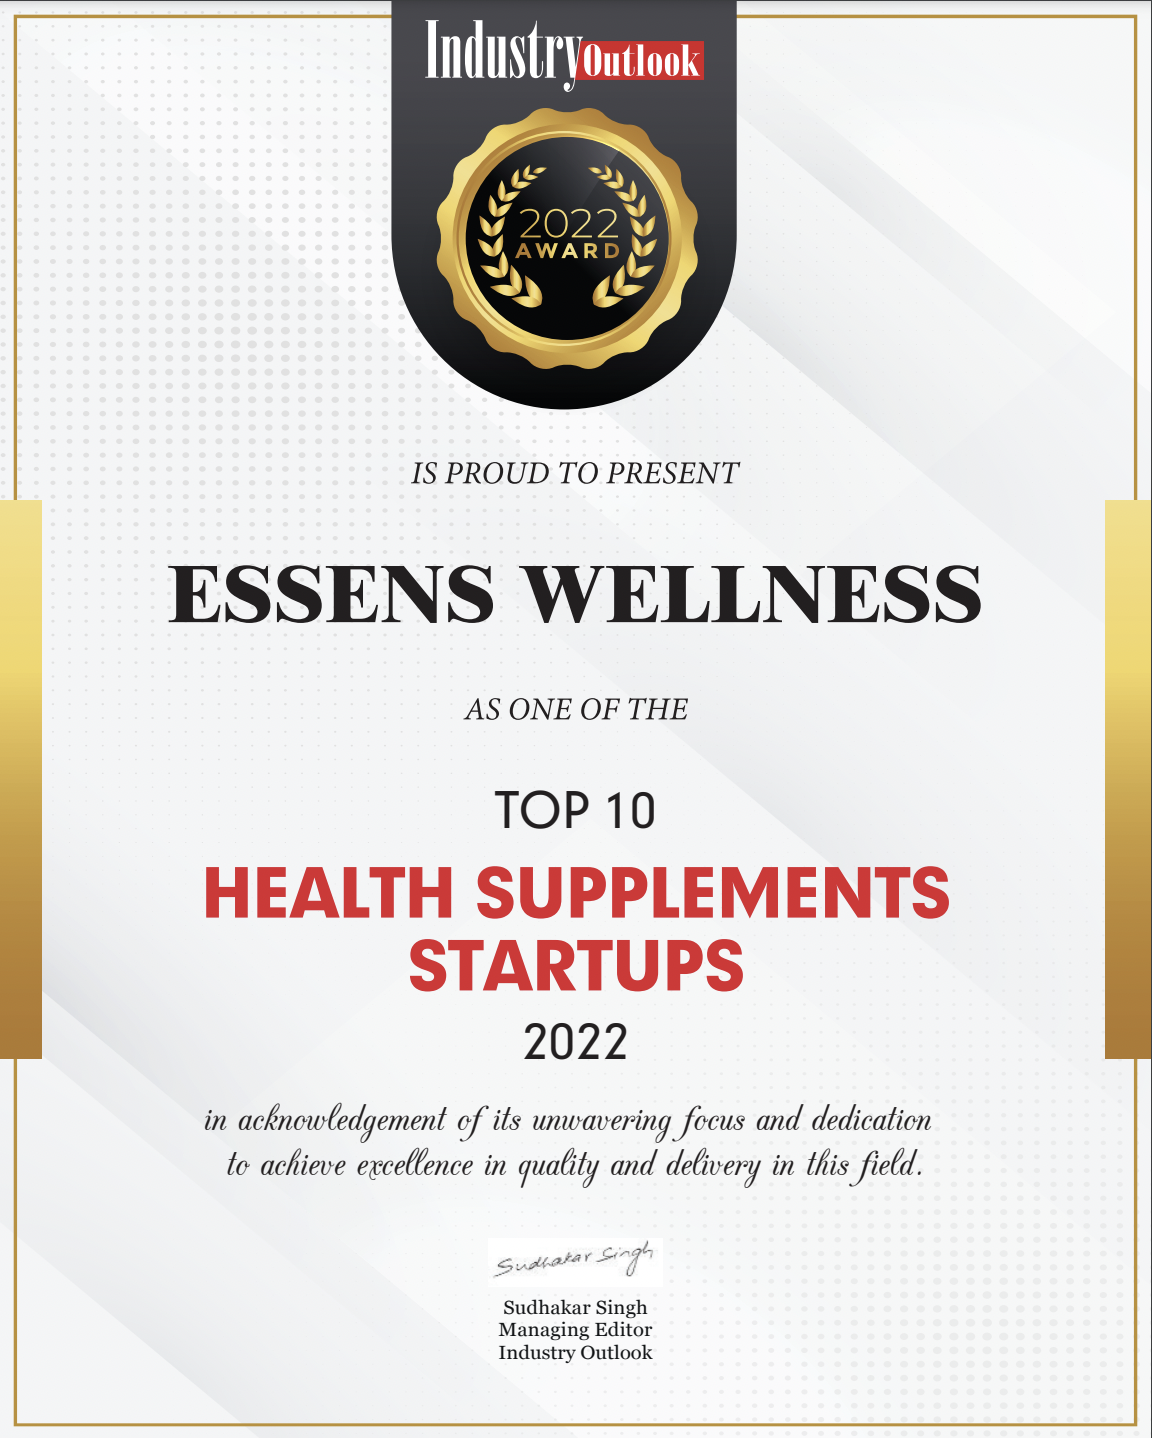 Top 10 Health Supplement StartUps 2022 by Industry Outlook